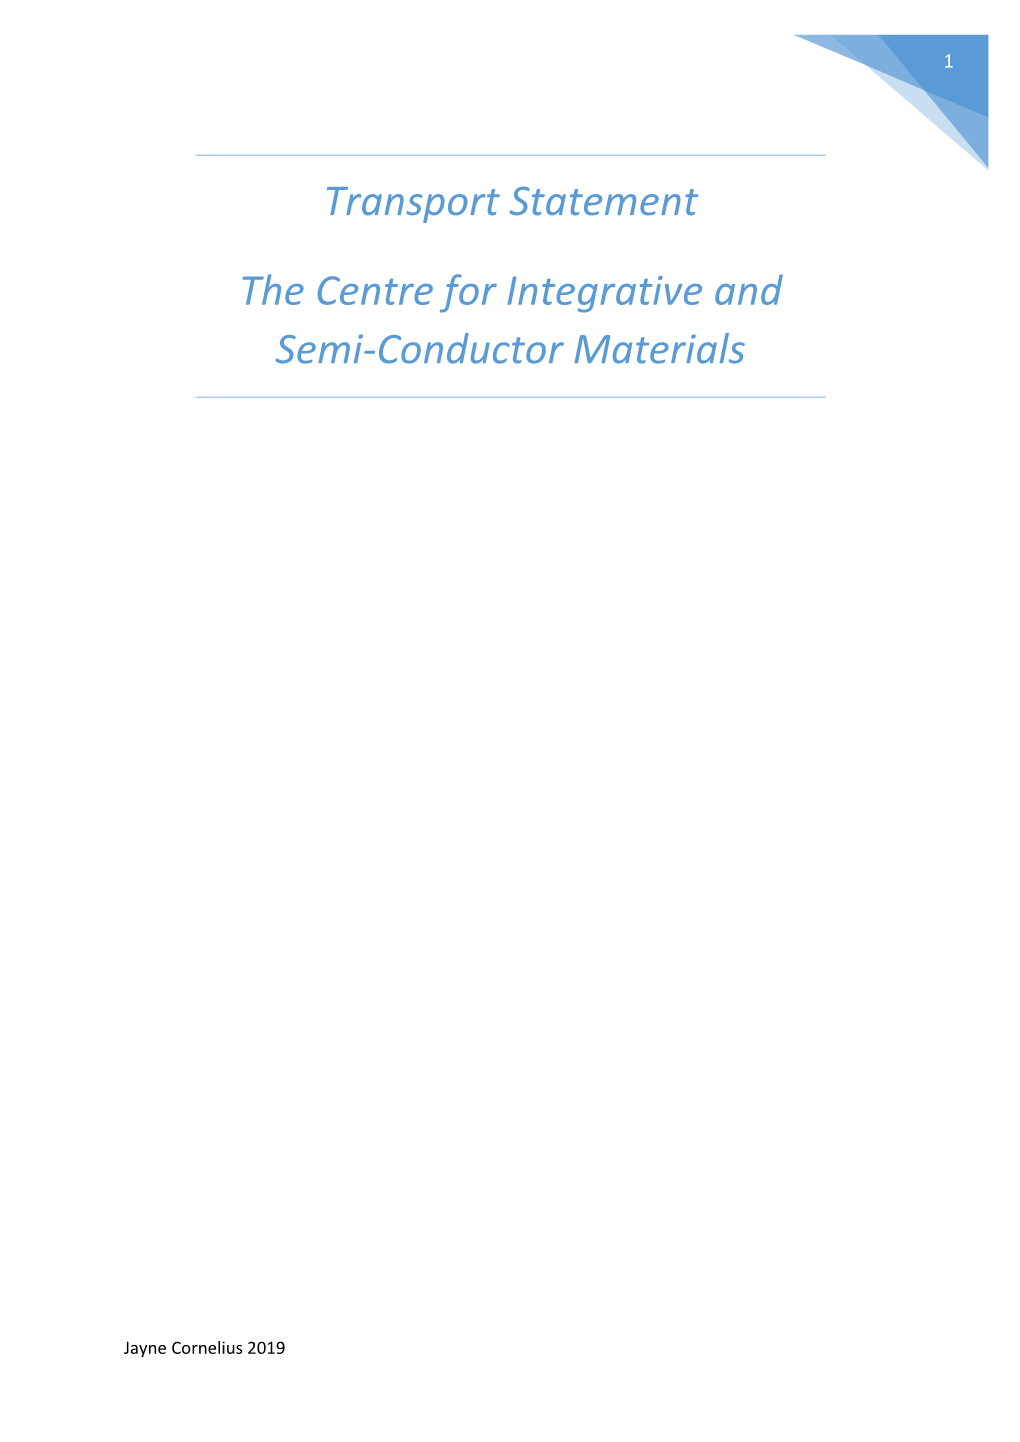 Transport Statement the Centre for Integrative and Semi-Conductor